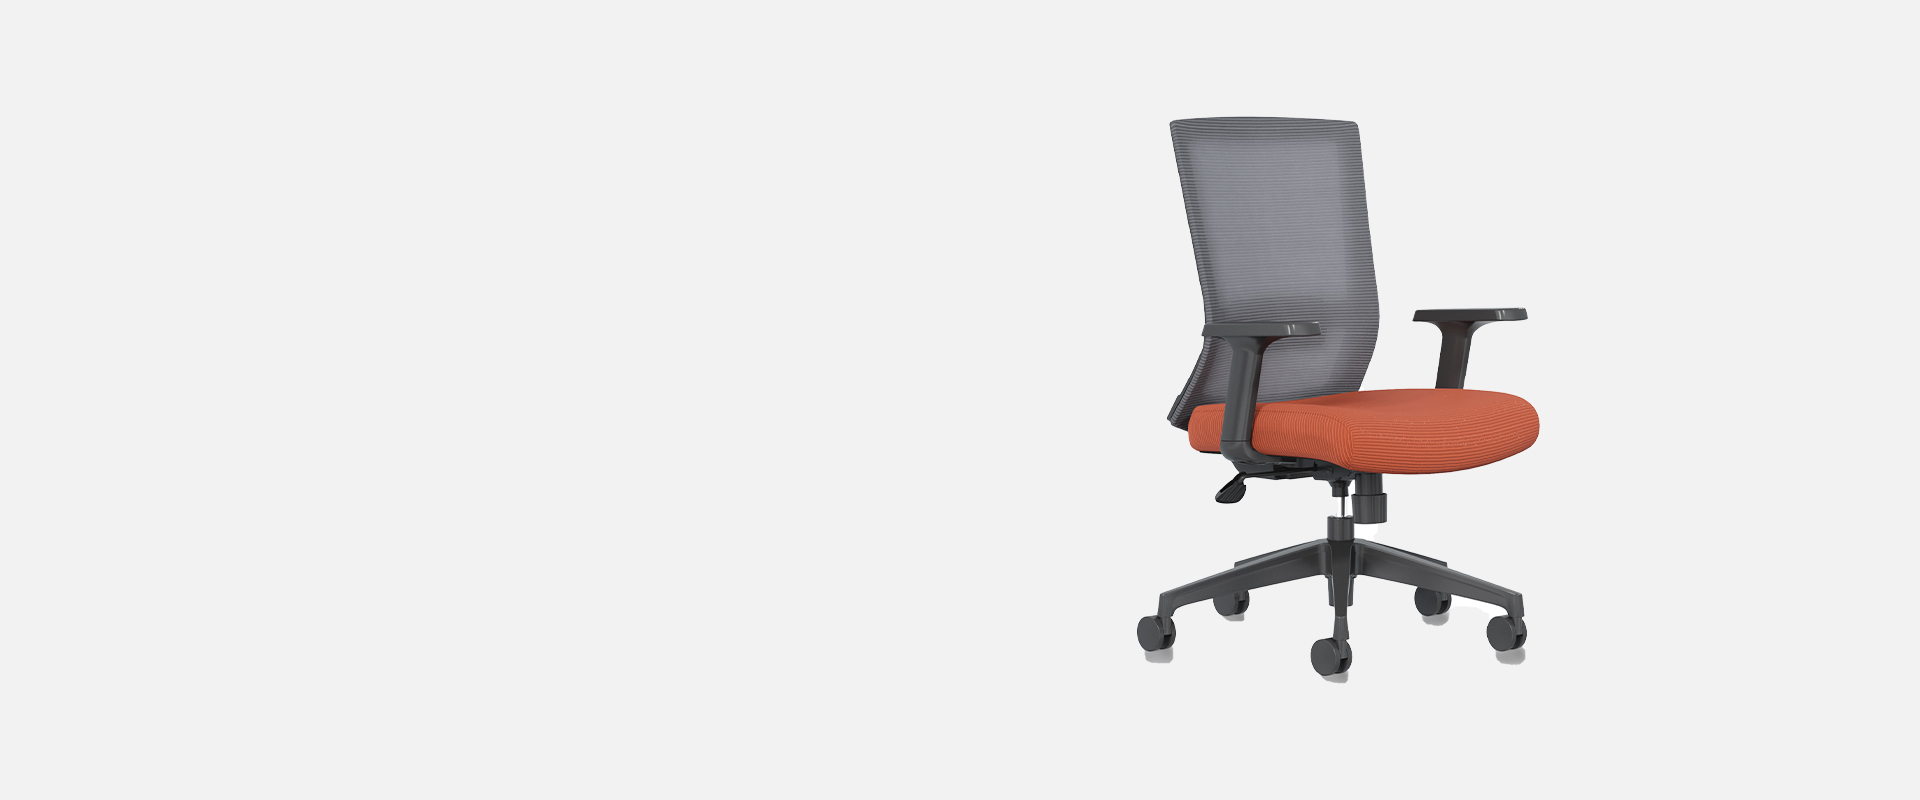 Details about   Ergonomic Mesh Task Chair By Sunon $299 Sale $149 